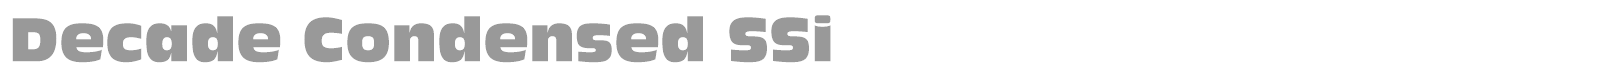 Decade Condensed SSi font preview